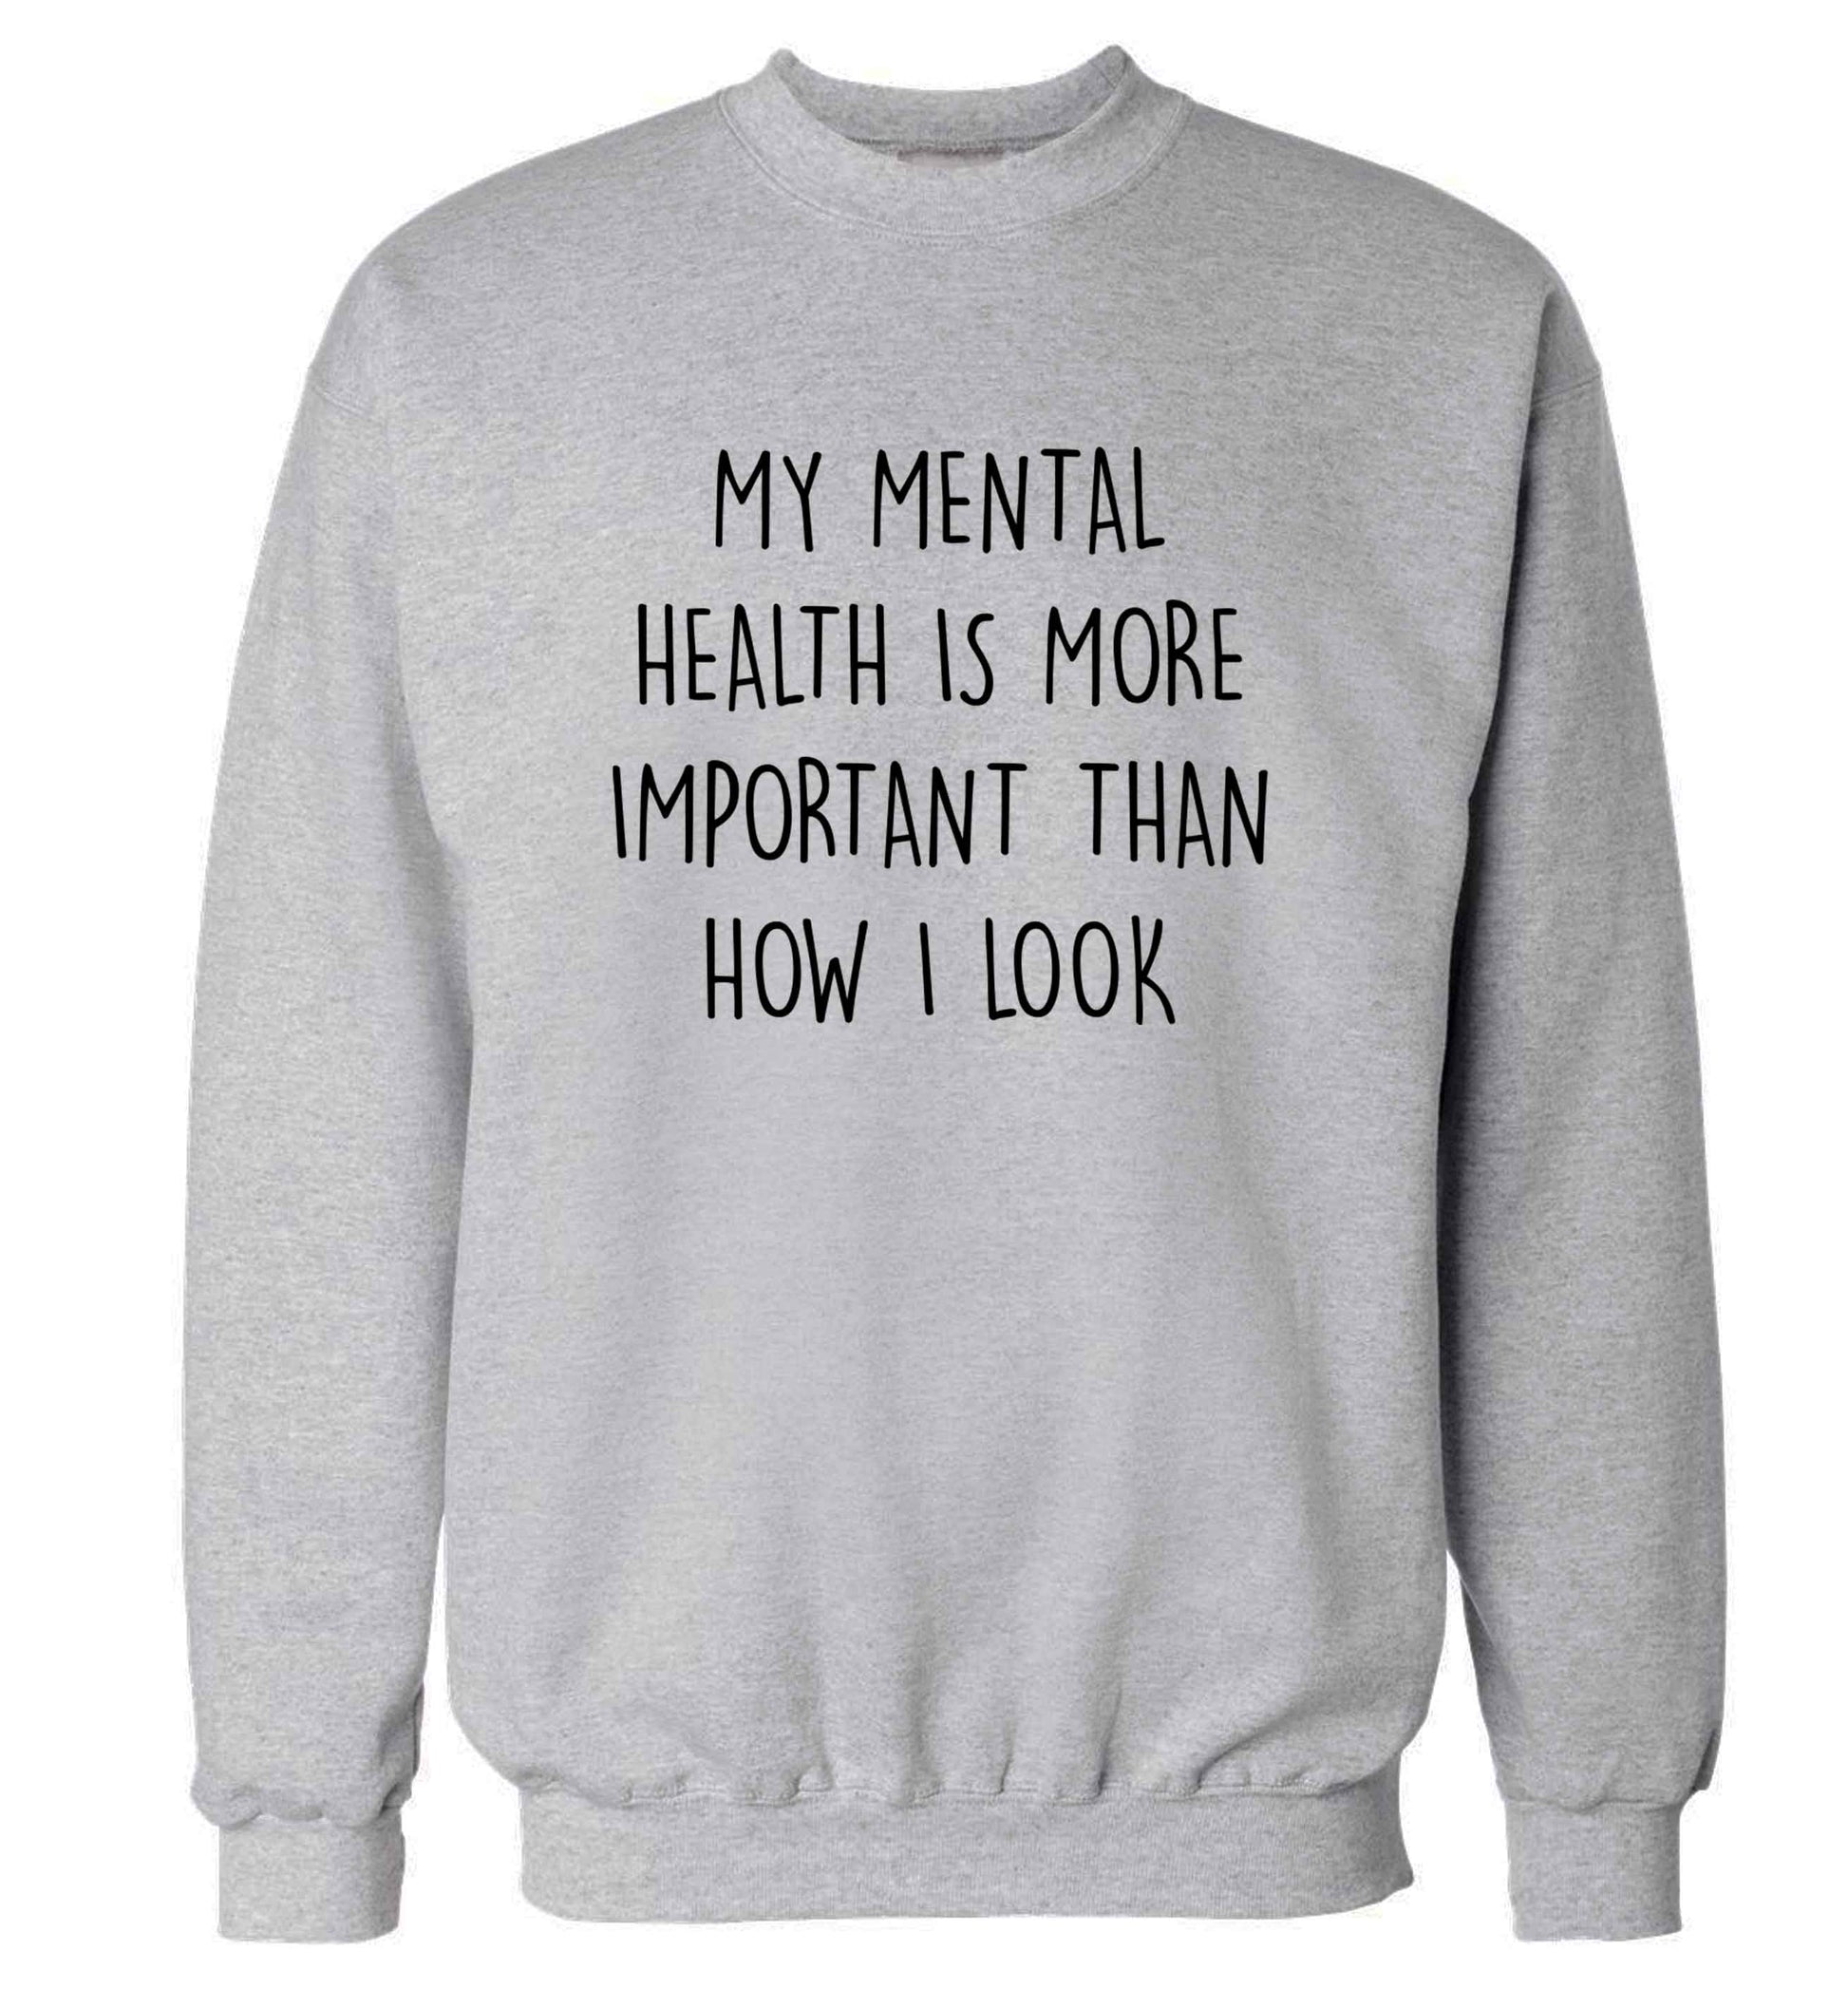 My mental health is more importnat than how I look adult's unisex grey sweater 2XL